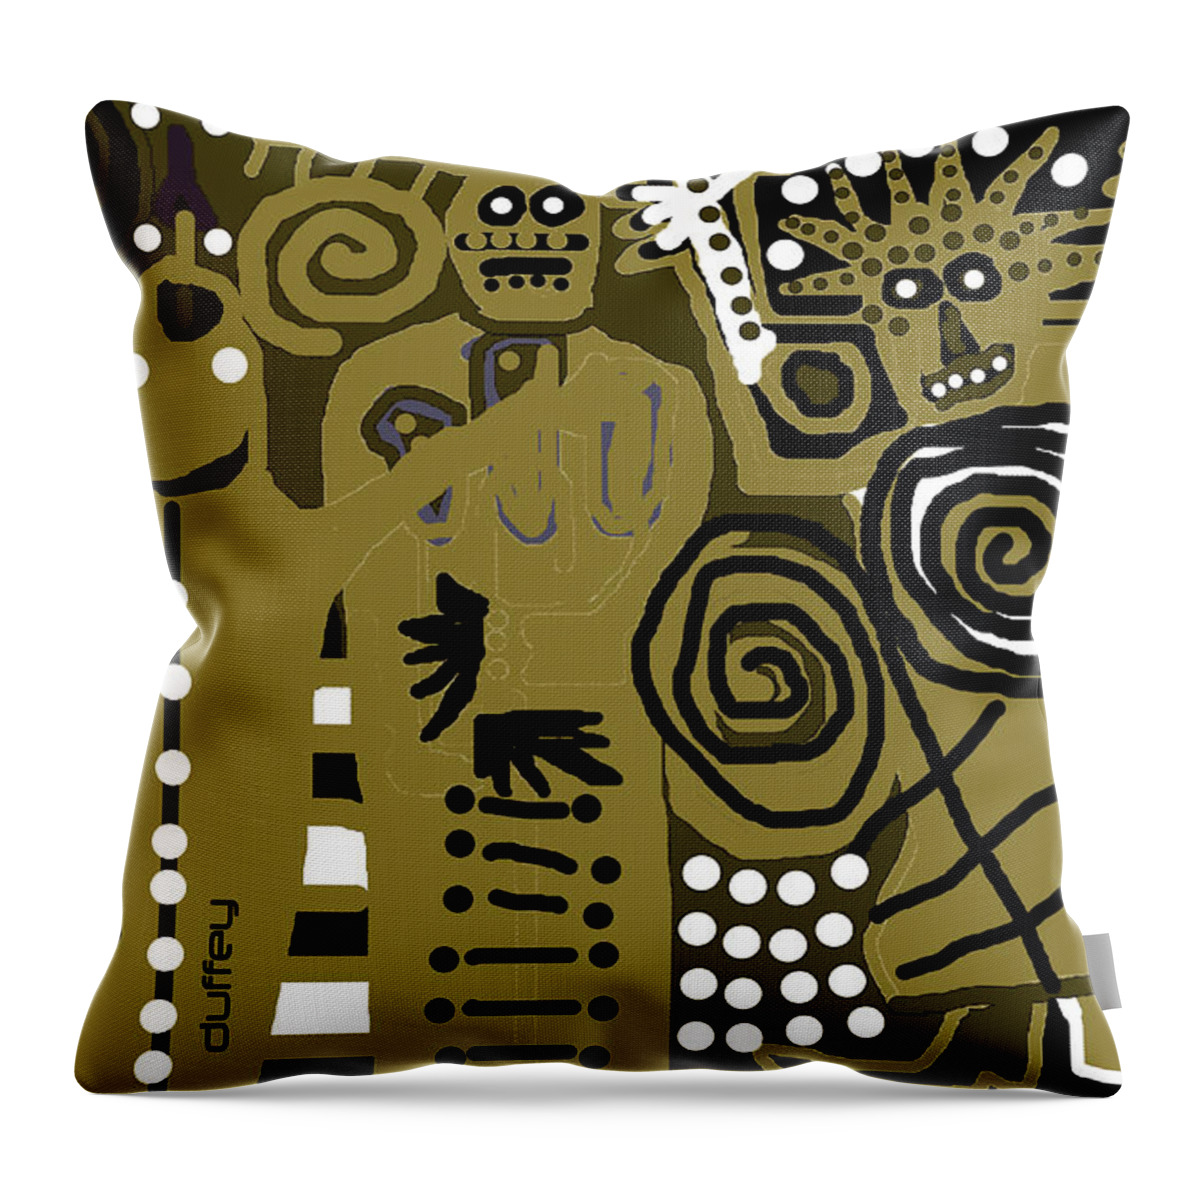 Sky People Throw Pillow featuring the photograph Ancients 1d by Doug Duffey